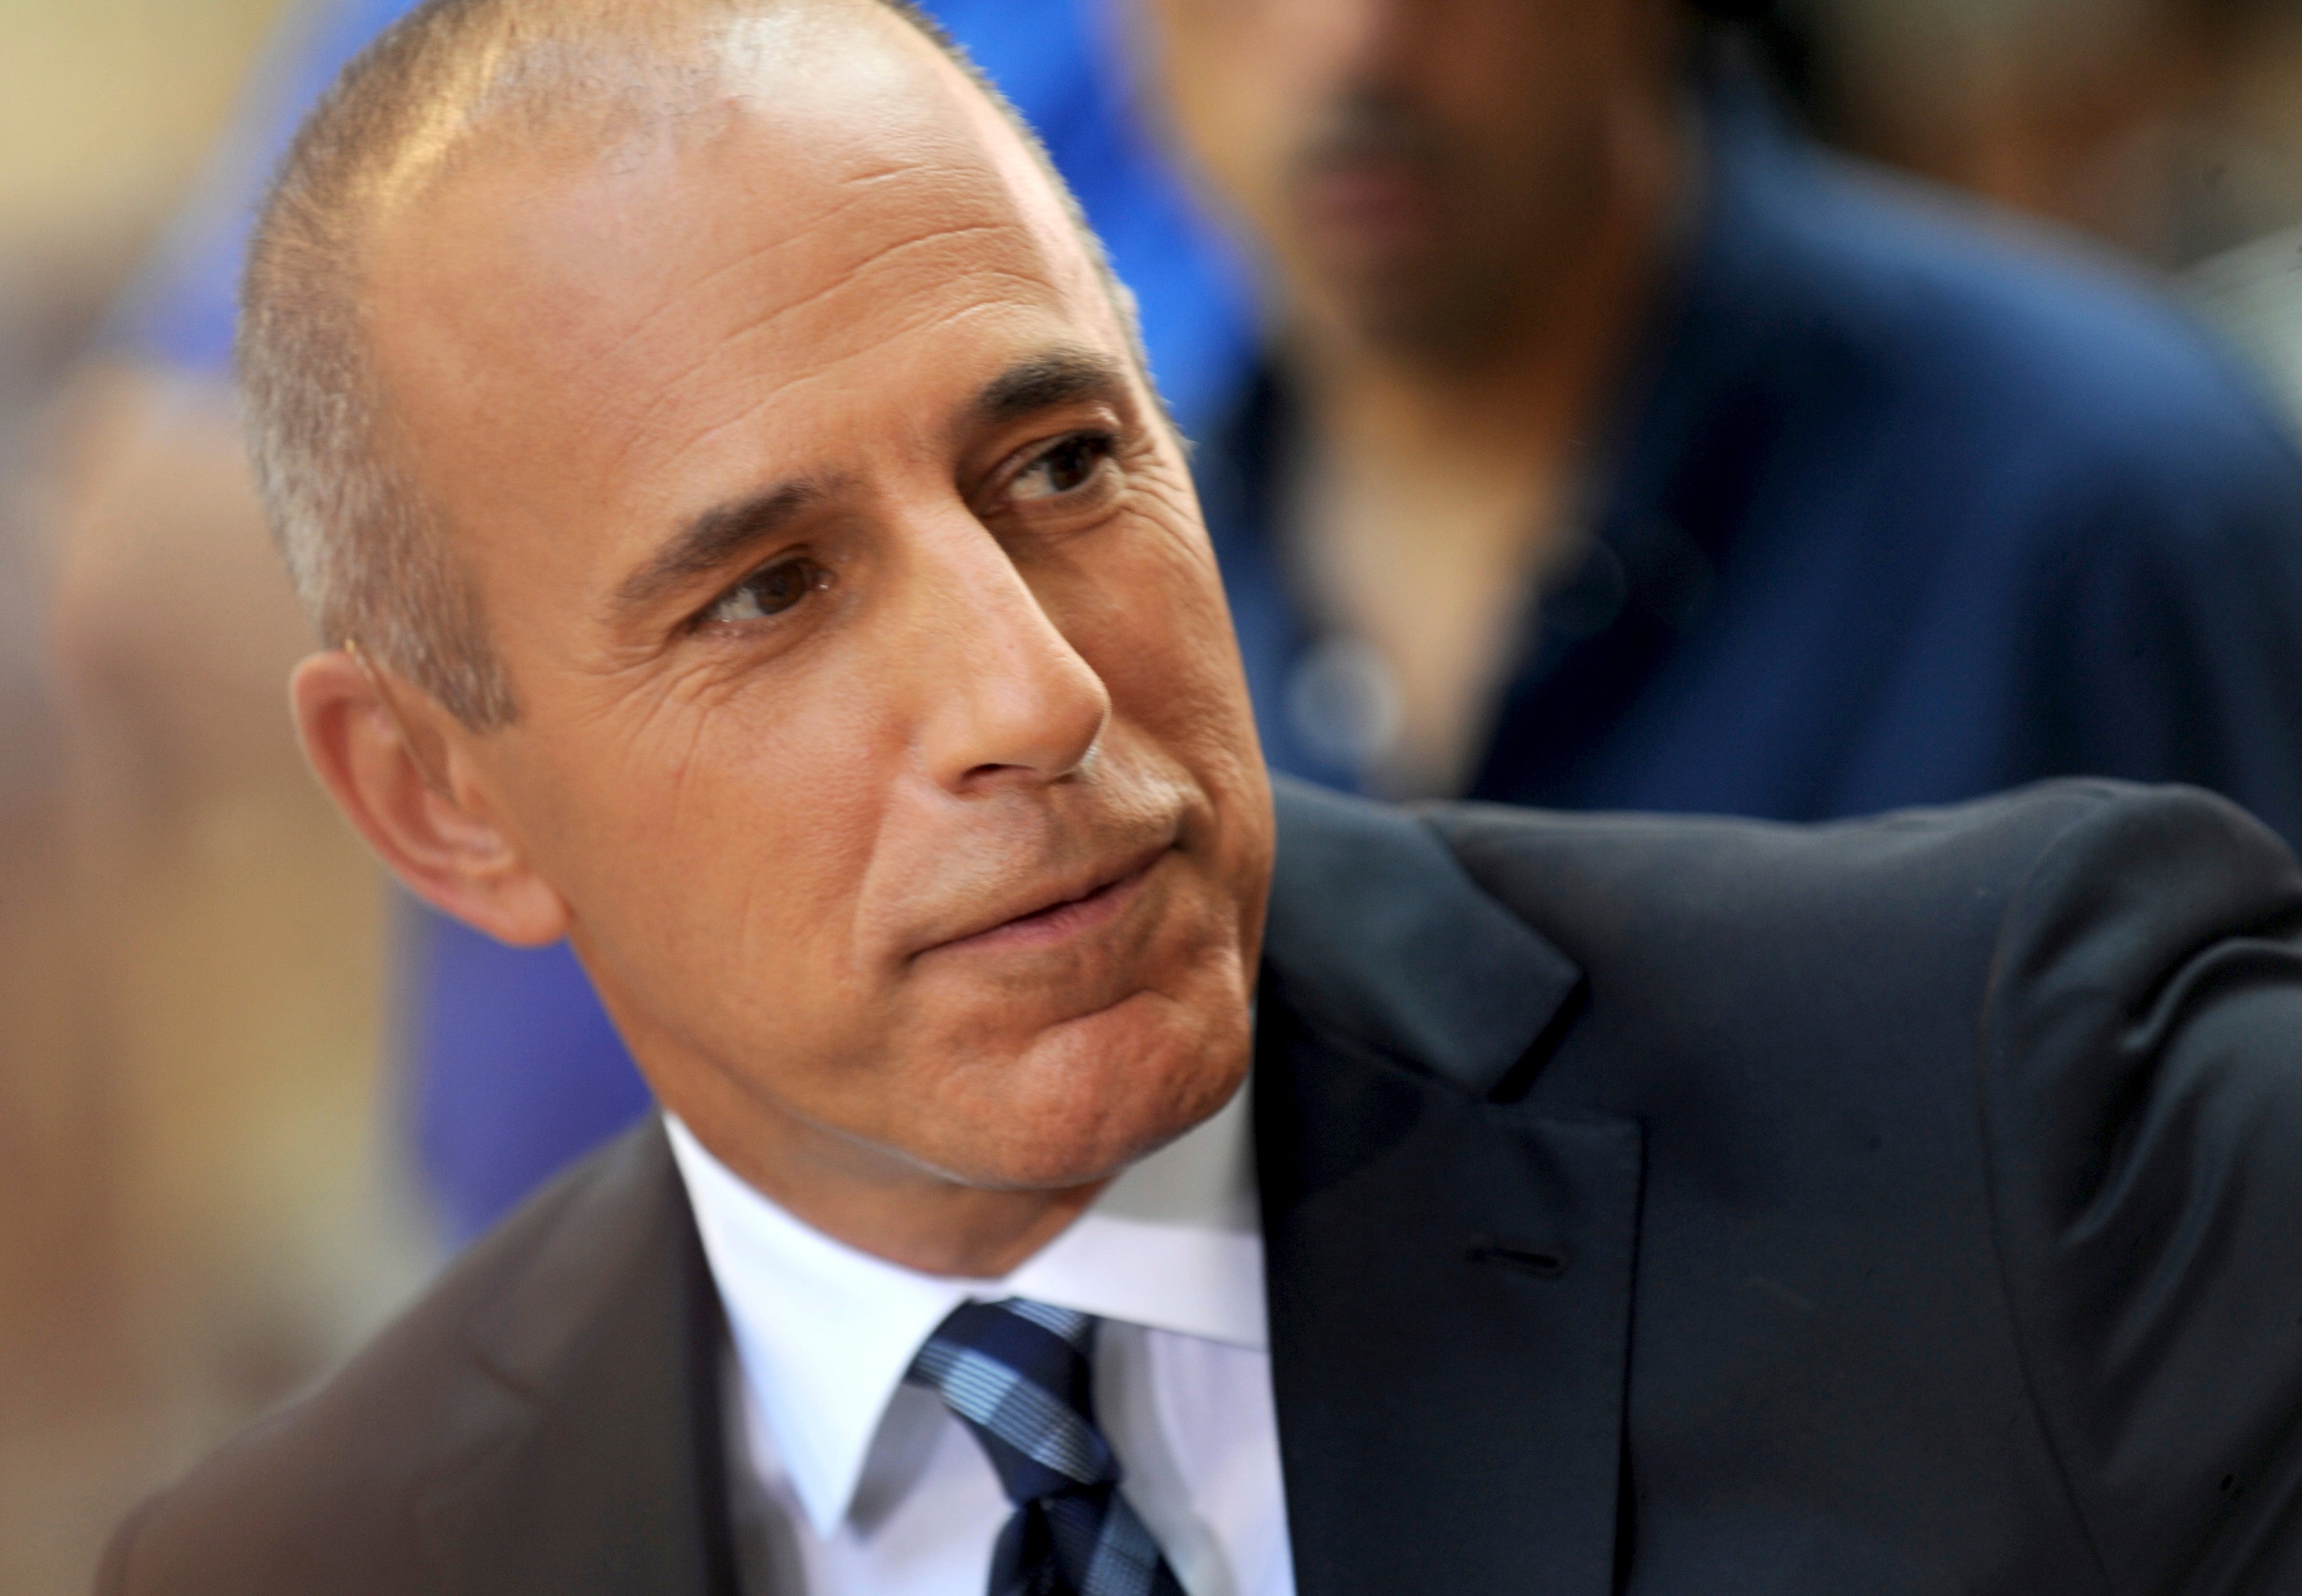 Matt Lauer Fired Overnight After NBC Received A Complaint Alleging 'Inappropriate Sexual Behavior'